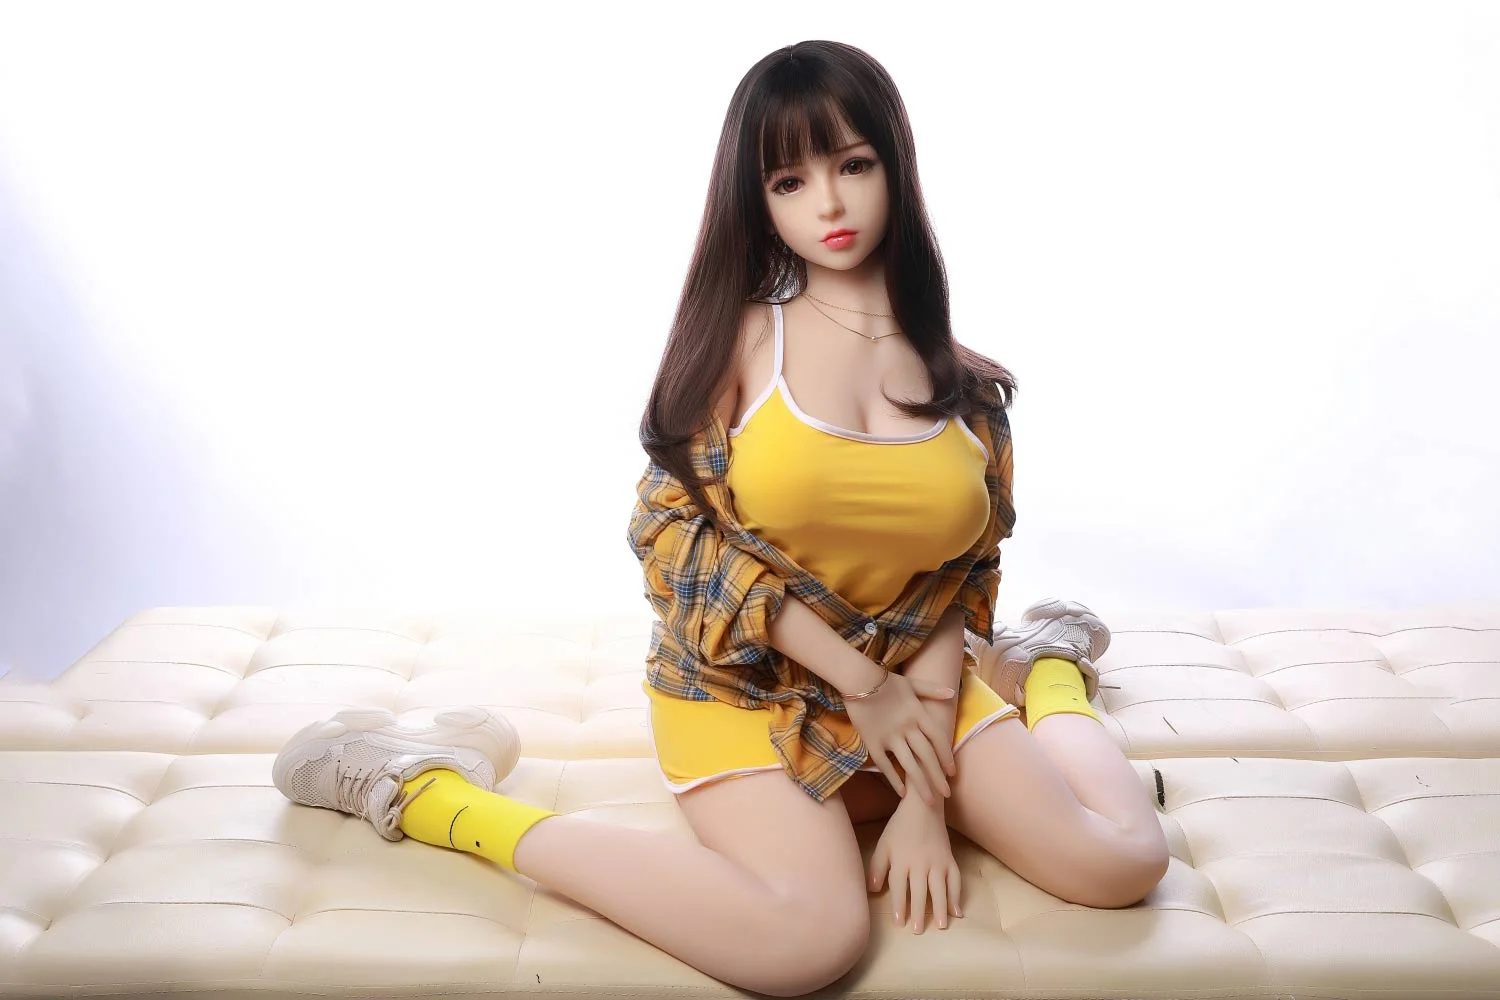 A sex doll sitting on knees with legs apart